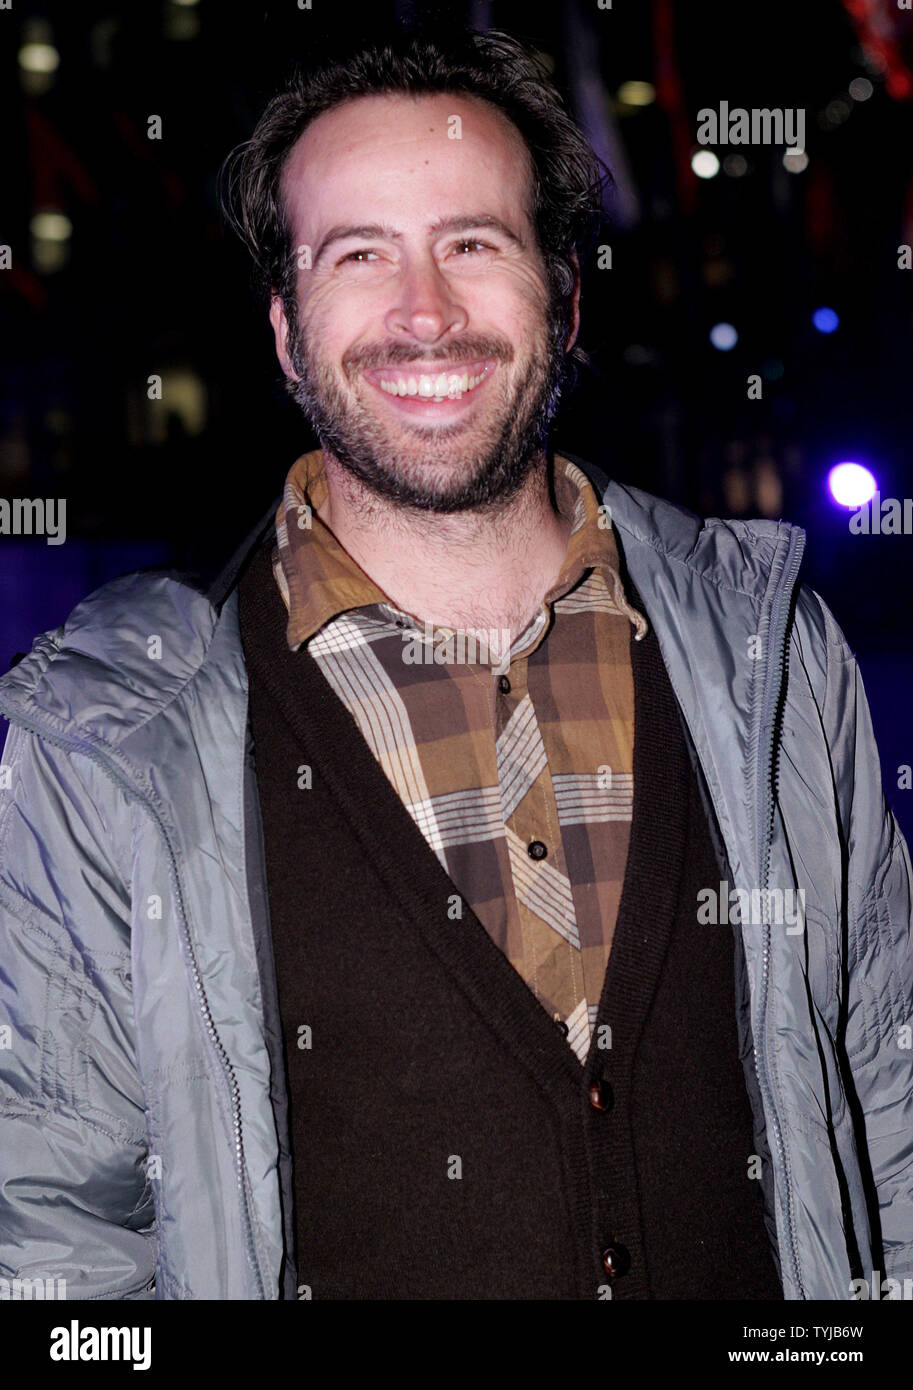 Actor Jason Lee attends the 75th Christmas tree lighting ceremony at Rockefeller Center on November 28, 2007 in New York City. The 84-foot high Norway spruce is being illuminated by 30,000 light-emitting diodes which use half the electricity of conventional bulbs.  (UPI Photo/Monika Graff). Stock Photo